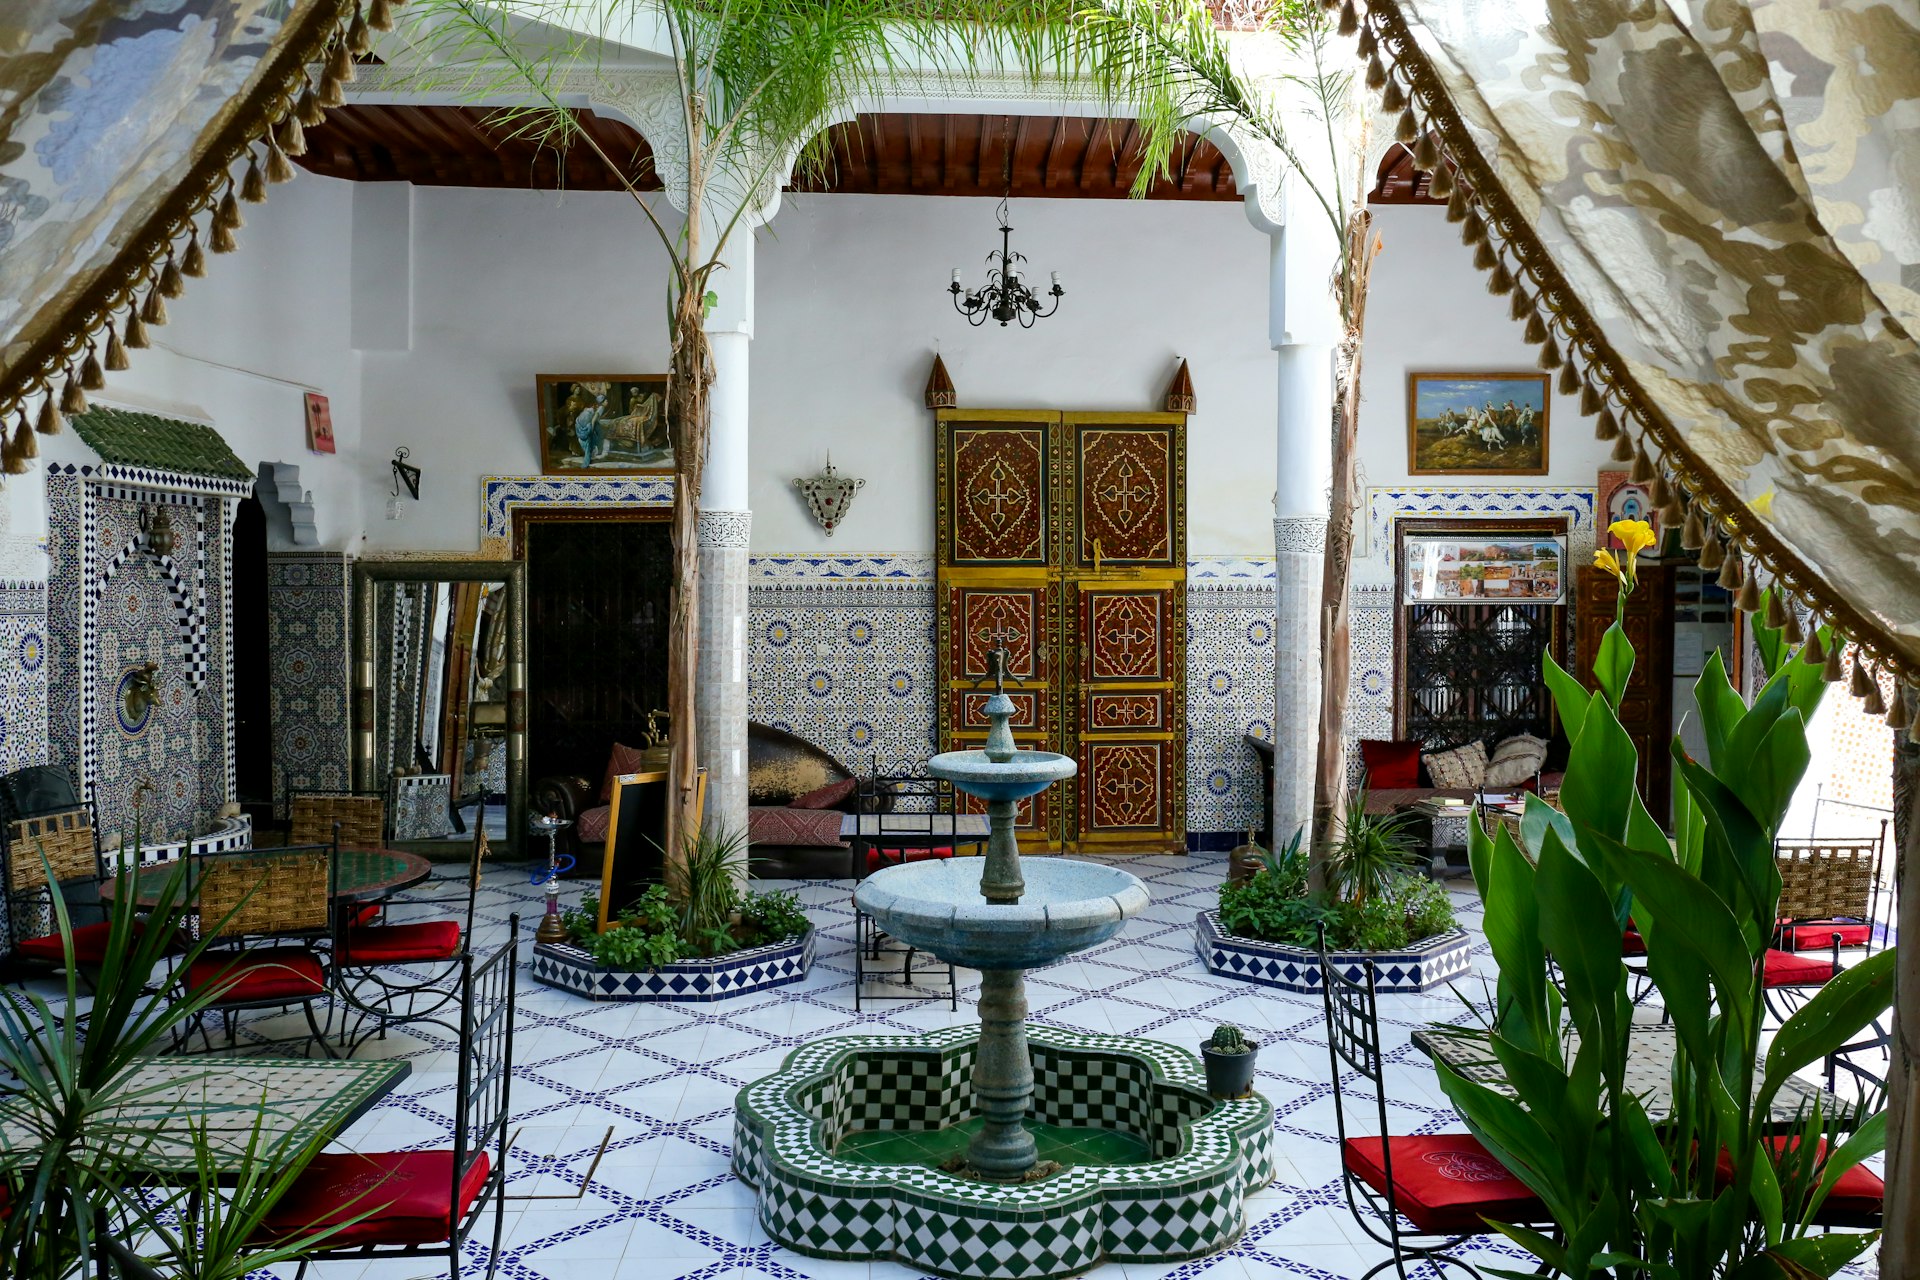 Tables and chairs inside a riad in Marrakesh, Morocco